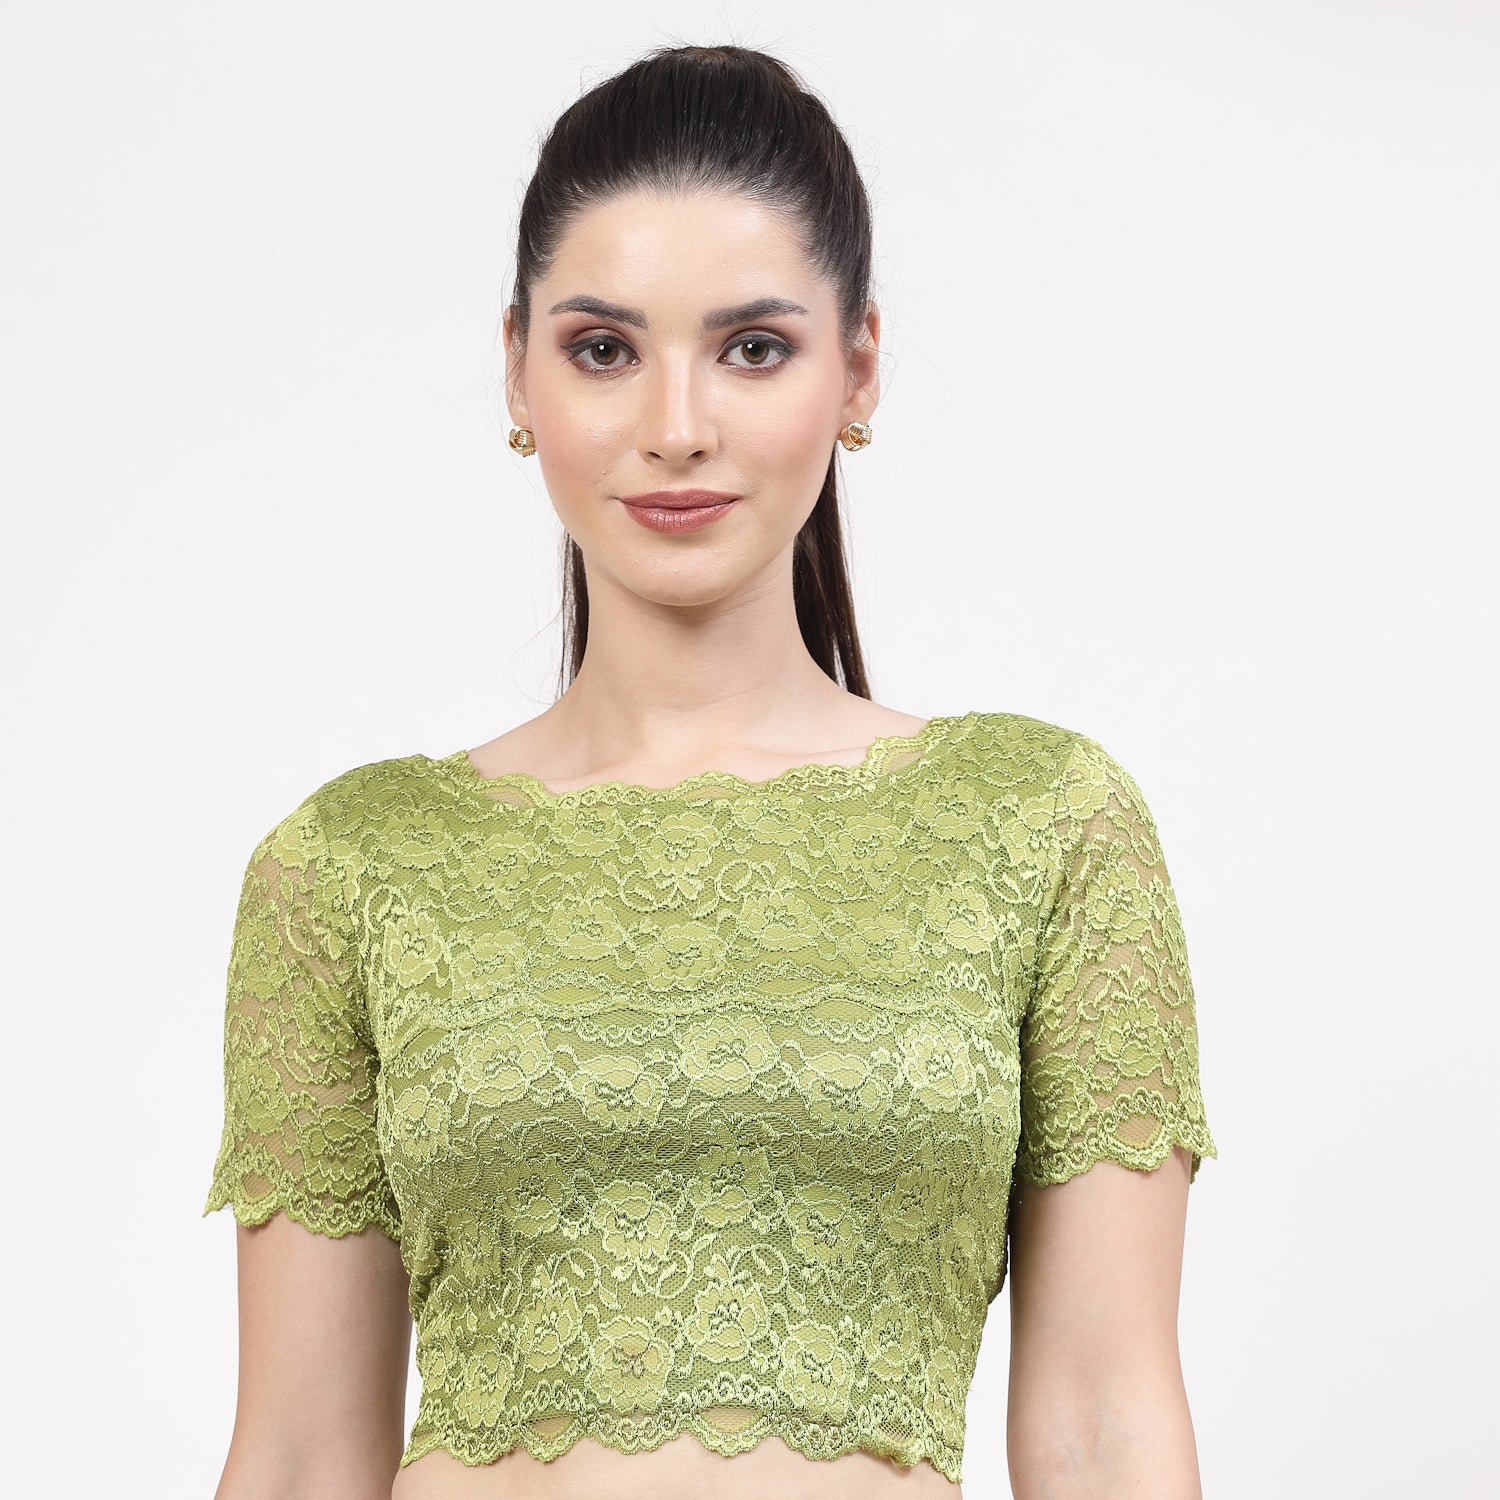 Neon Green Lace Blouse